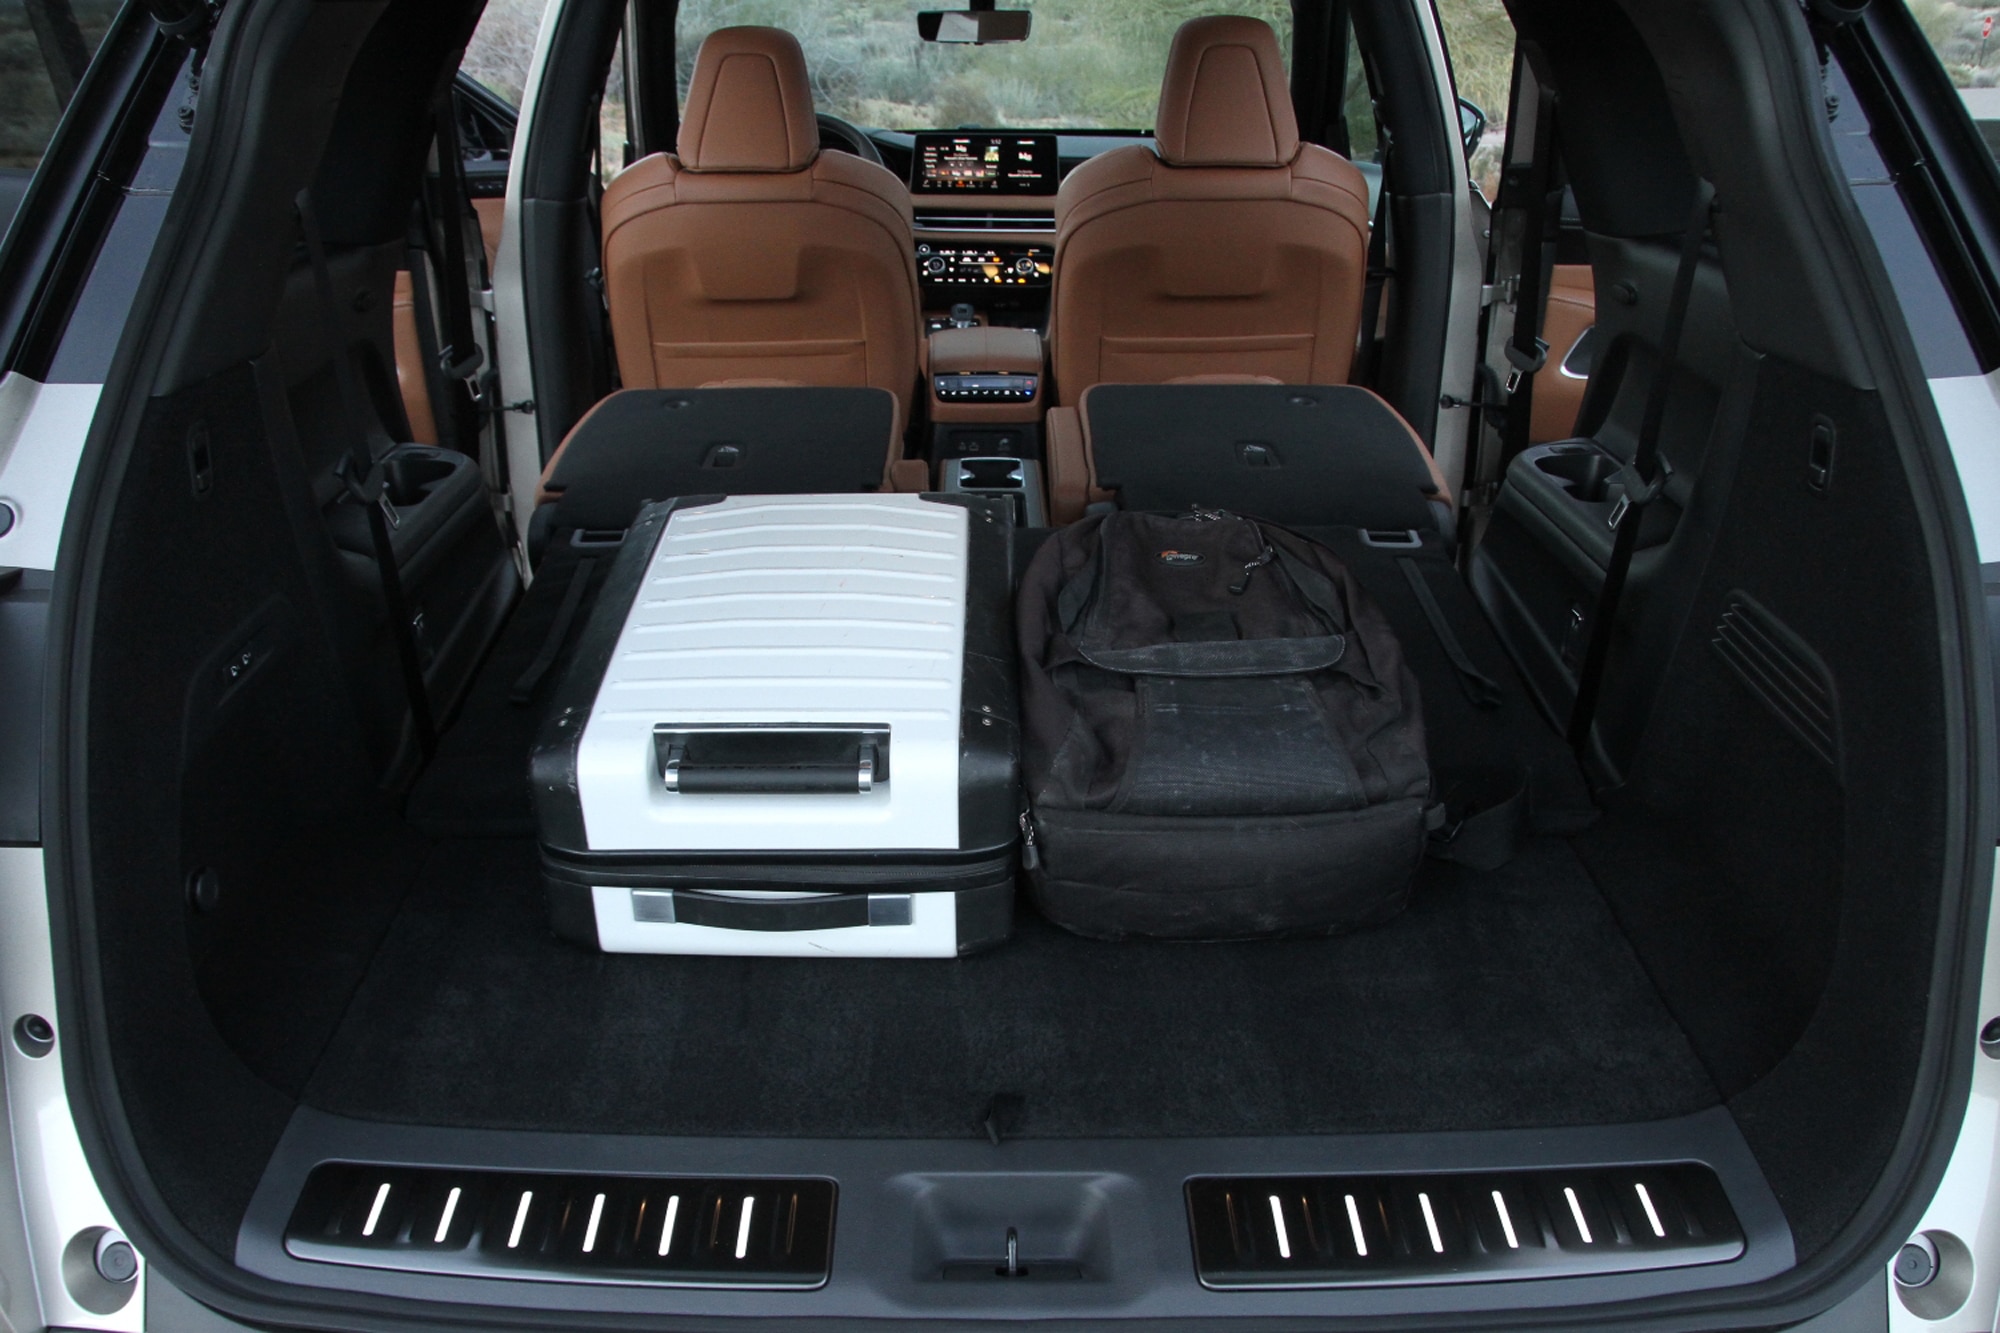 2023 Infiniti QX60 Cargo Space with seats down undefined luggage inside